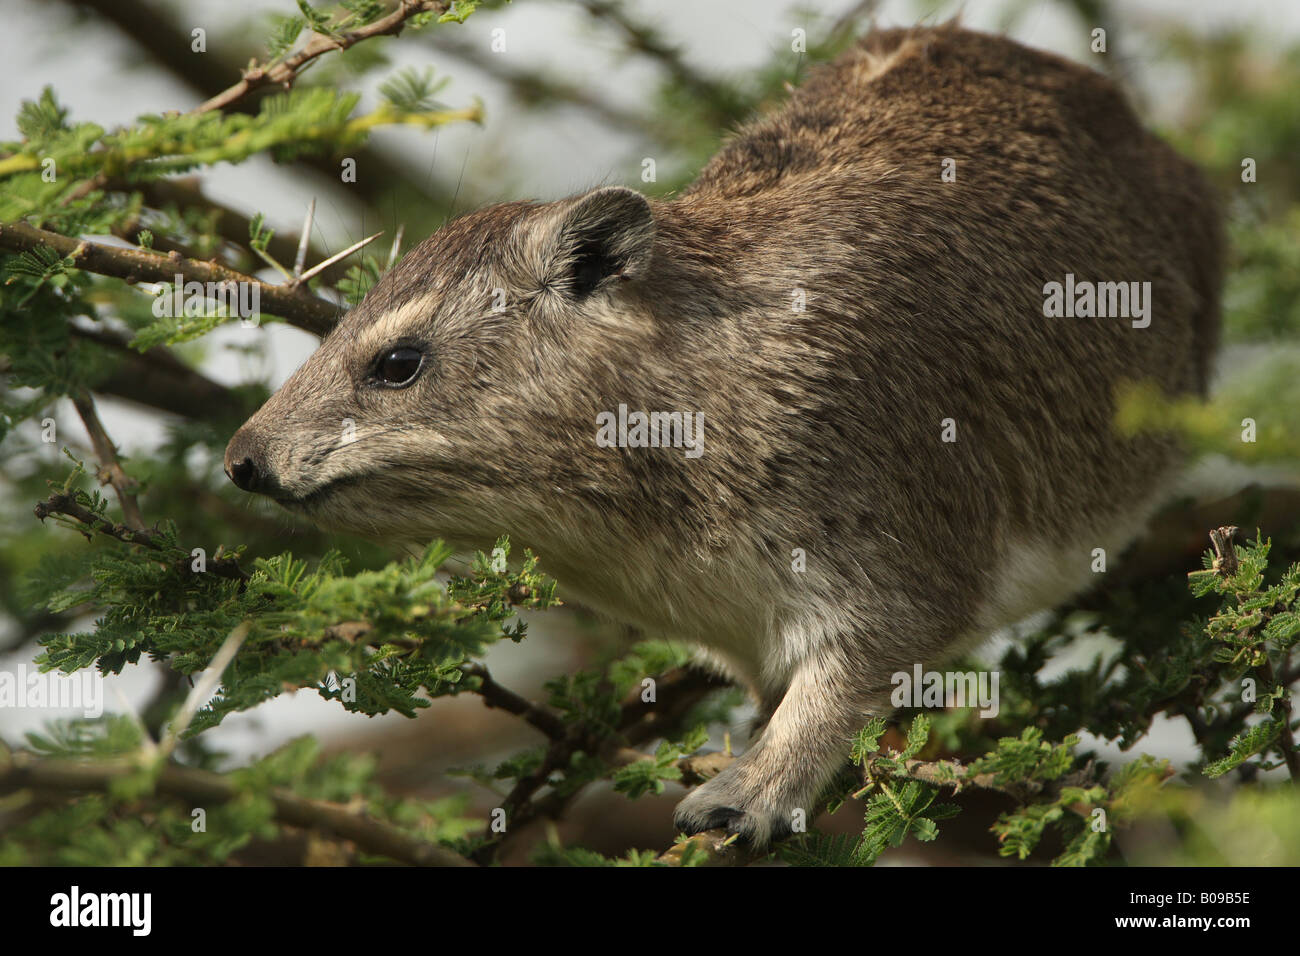 tree hyrax in branches Stock Photo